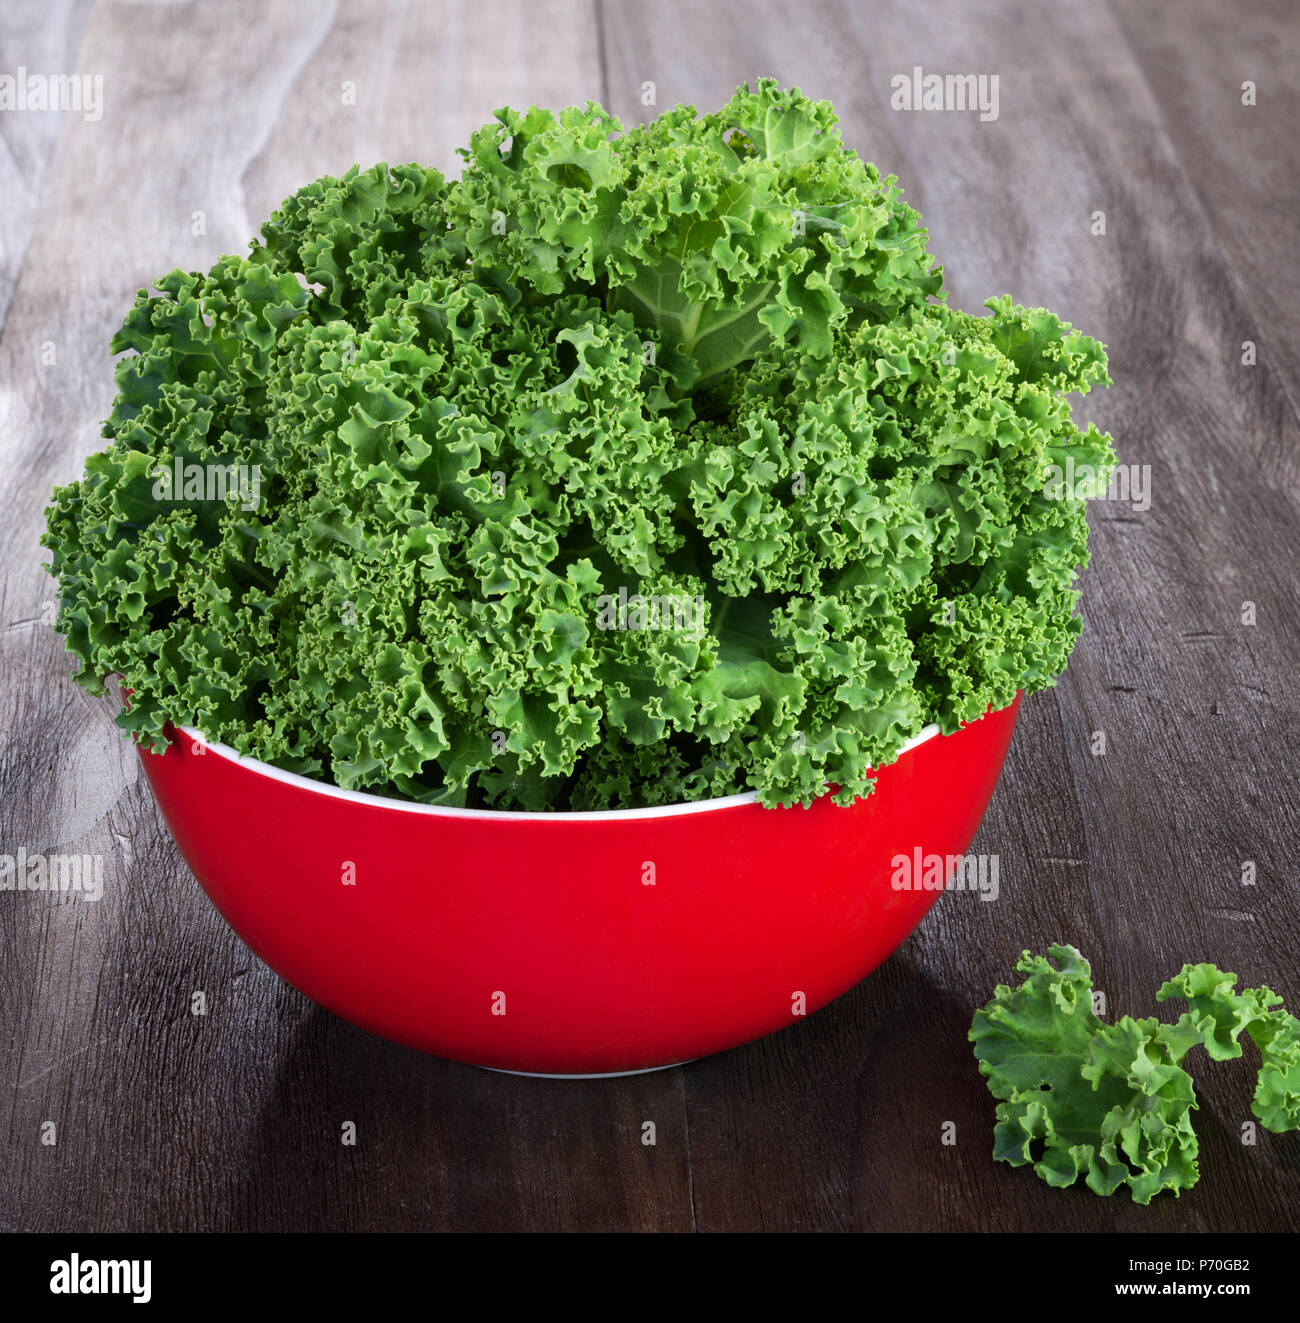 fresh green kale leaves in red ceramic bowl on vintage wooden table Stock Photo